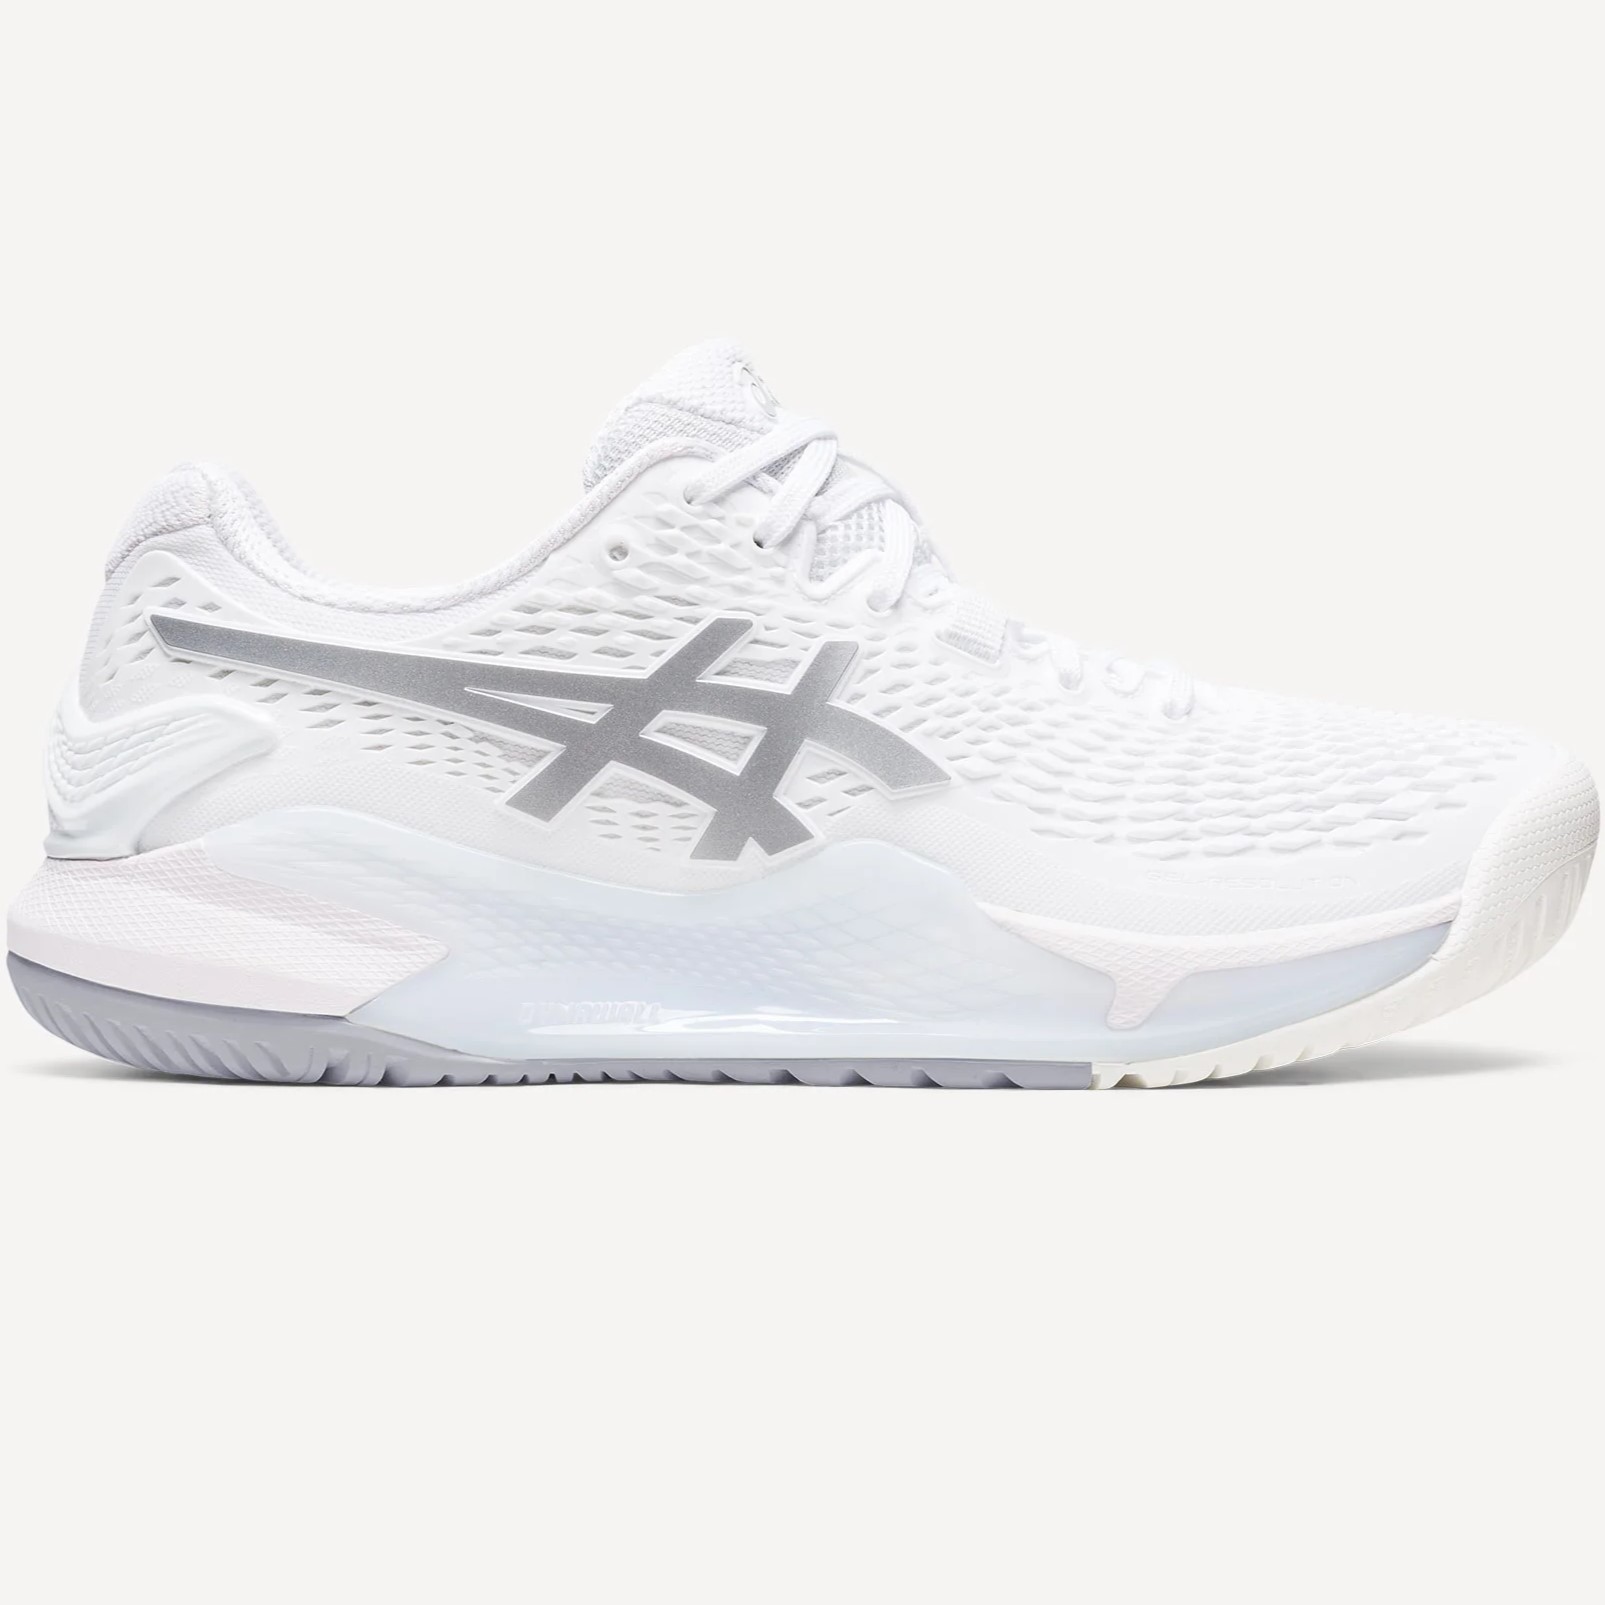 GIÀY CHAY BỘ ASICS NỮ GEL-RESOLUTION 9 WOMENS TENNIS SHOES WHITE PURE SILVER 1042A208-100 8